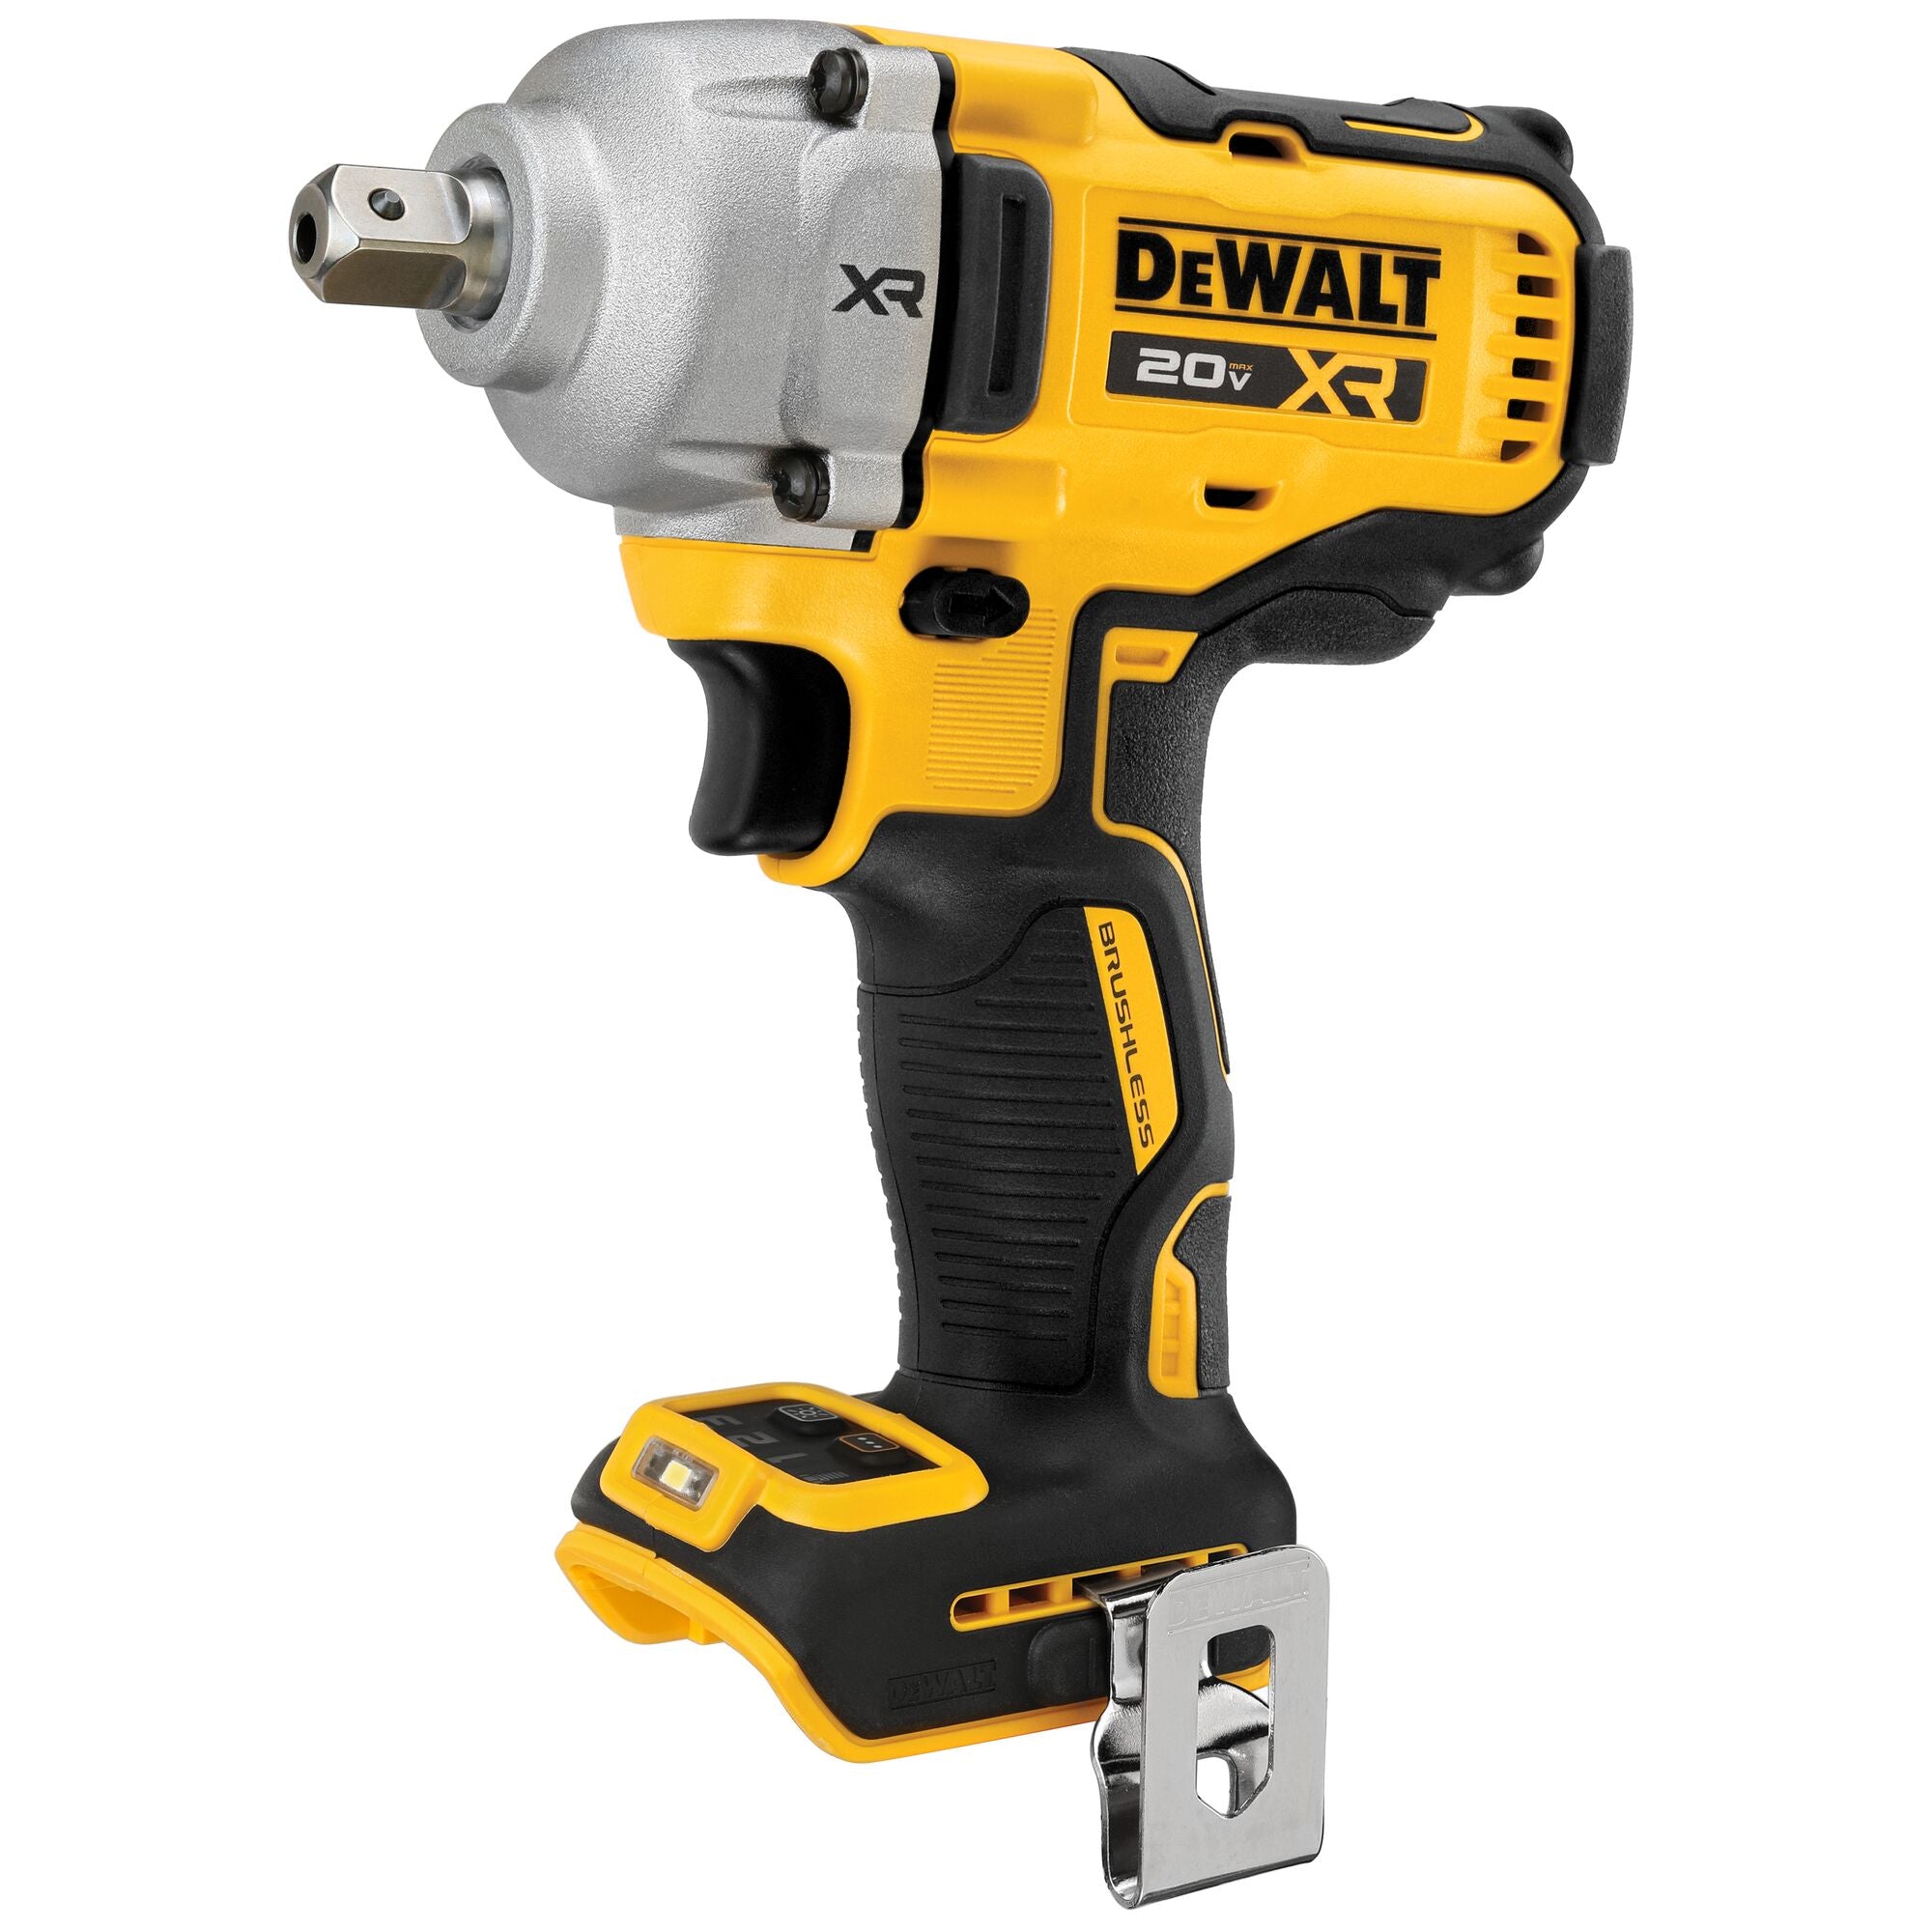 Dewalt DCF892B 20V MAX* XR® 1/2 in. Mid-Range Impact Wrench with Detent Pin Anvil (Tool Only)